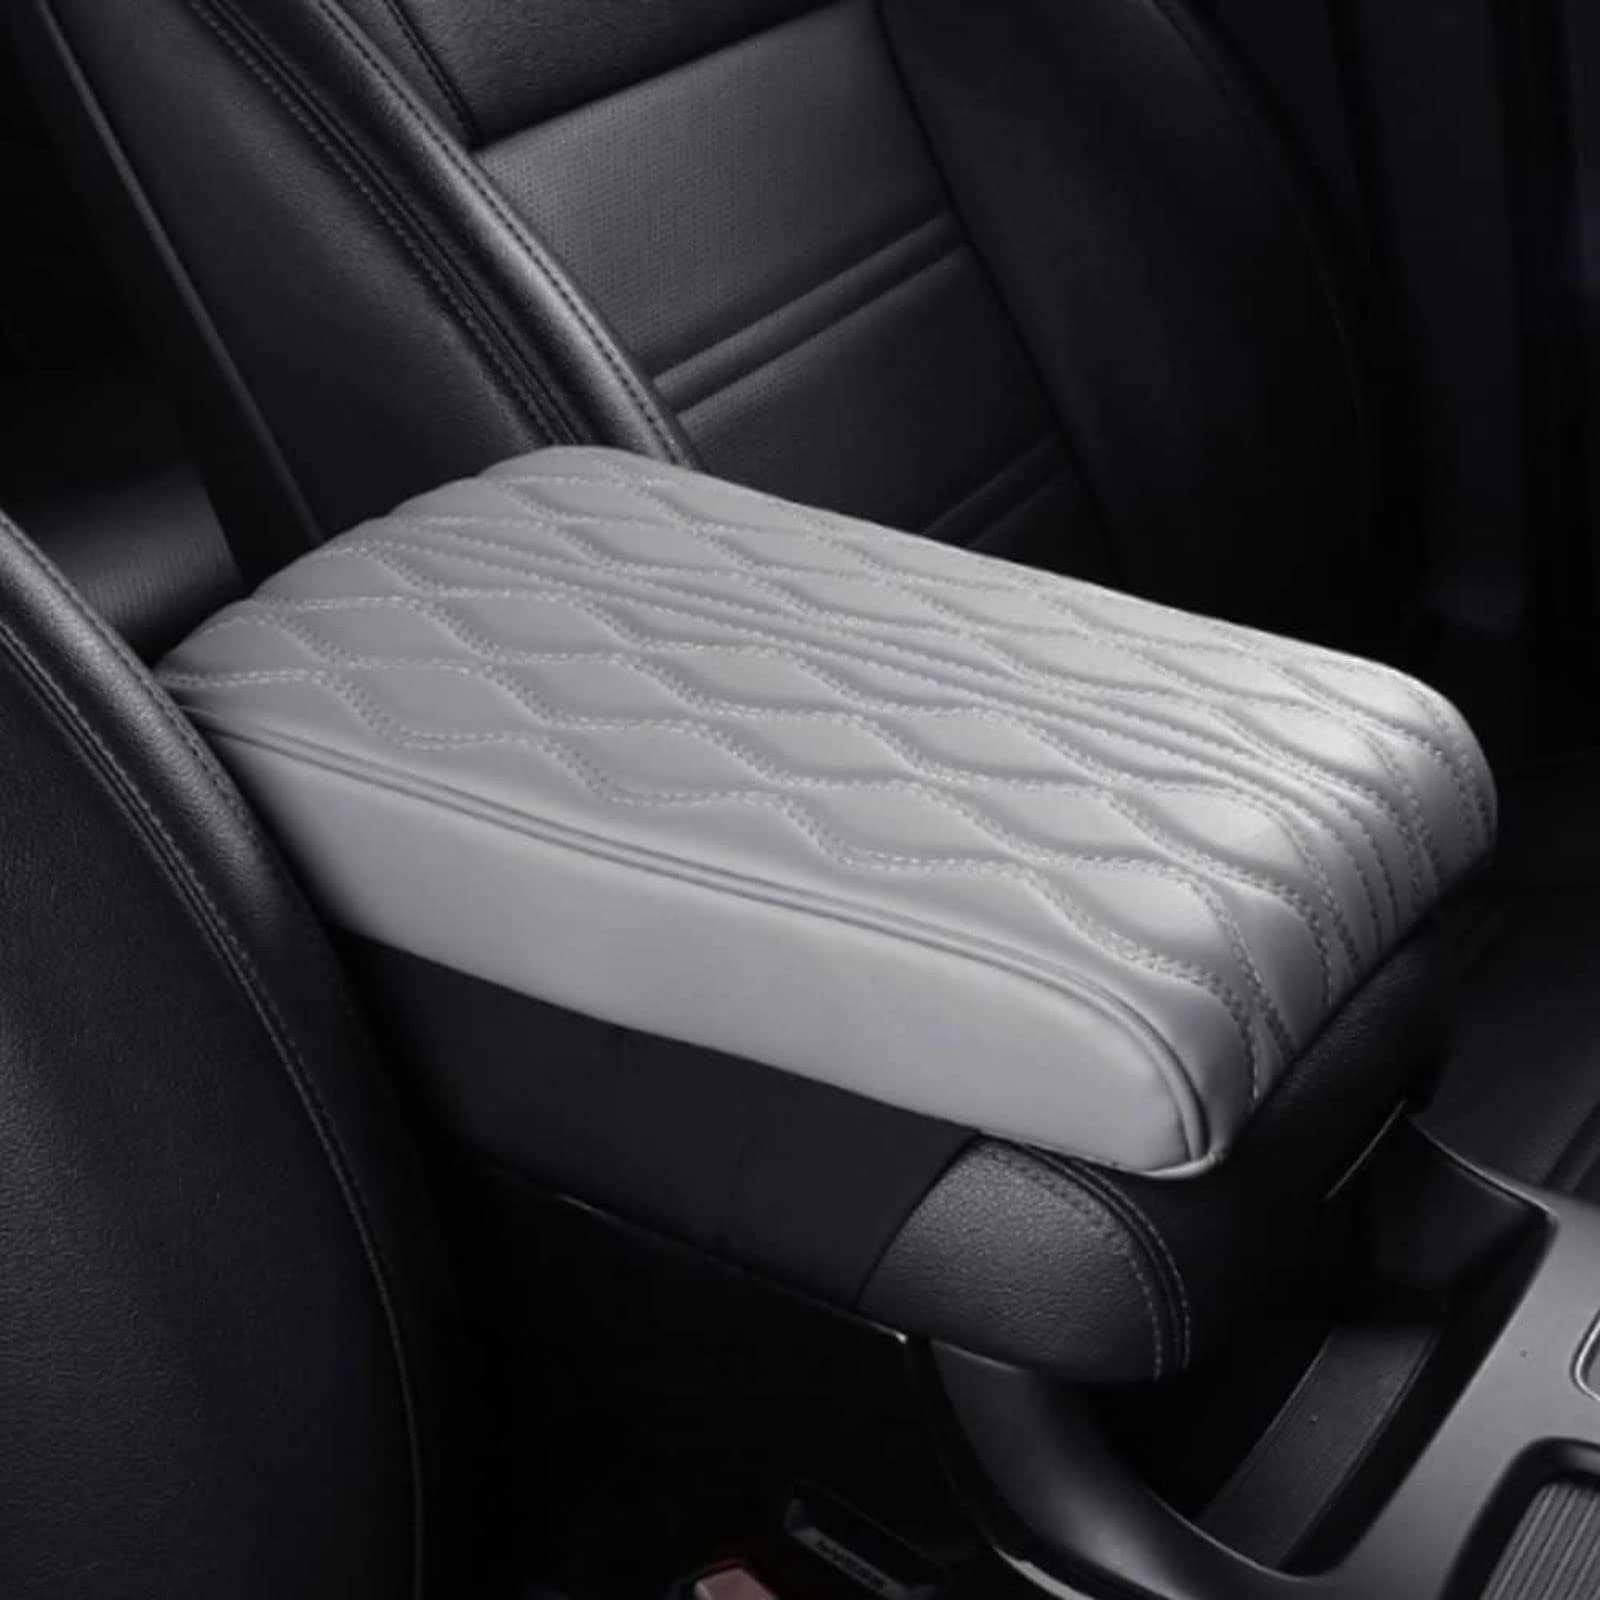 HIDRUO Leather Car Armrest Box Pad, Waterproof Car Armrest Center Console Cover Protector, Universal Arm Rest Cushion Pads for SUV/Truck/Vehicle (Gray, Ripple pattern) von HIDRUO